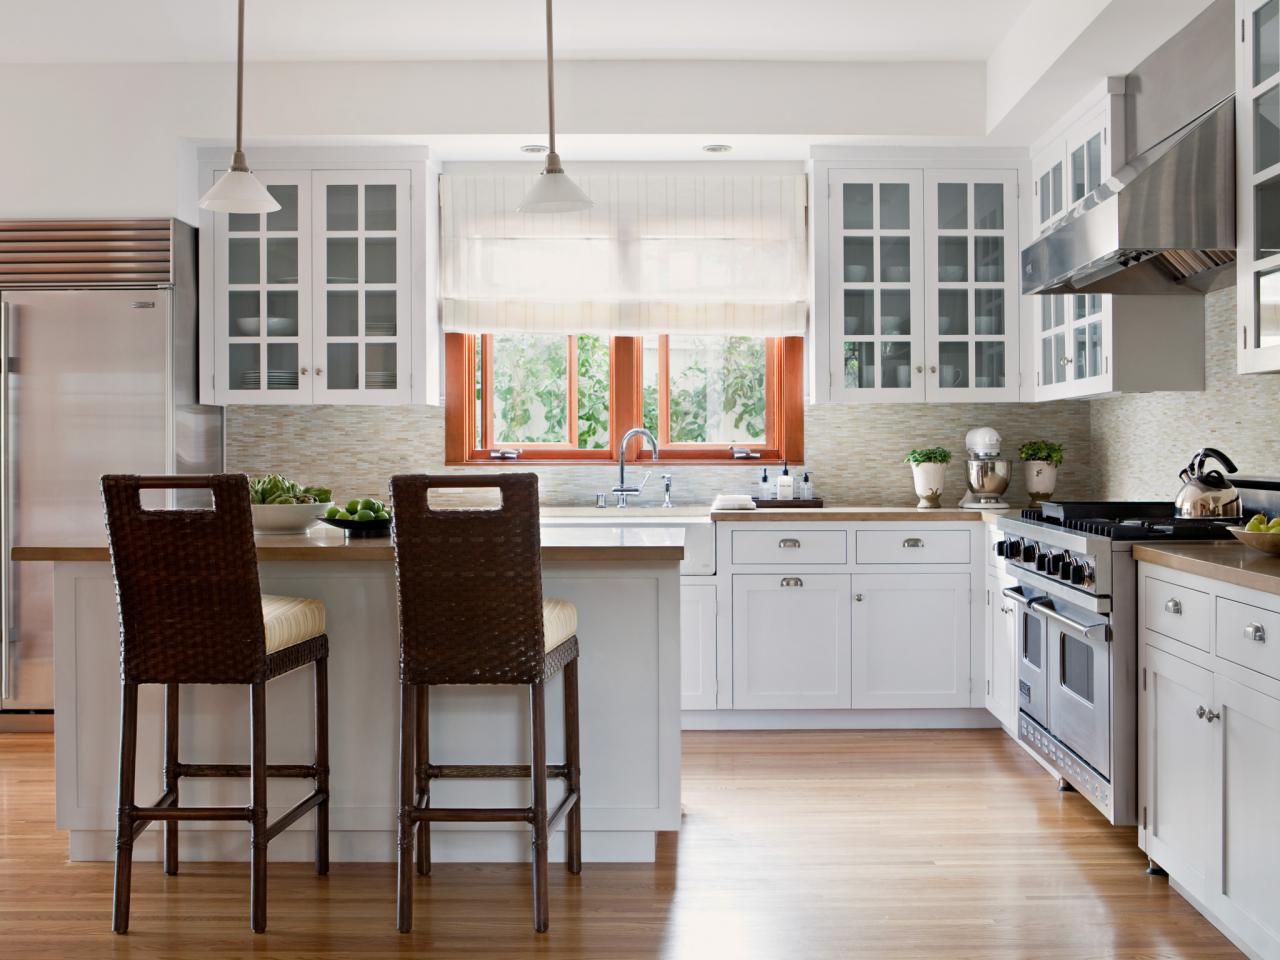 eclectic window treatment ideas for kitchens